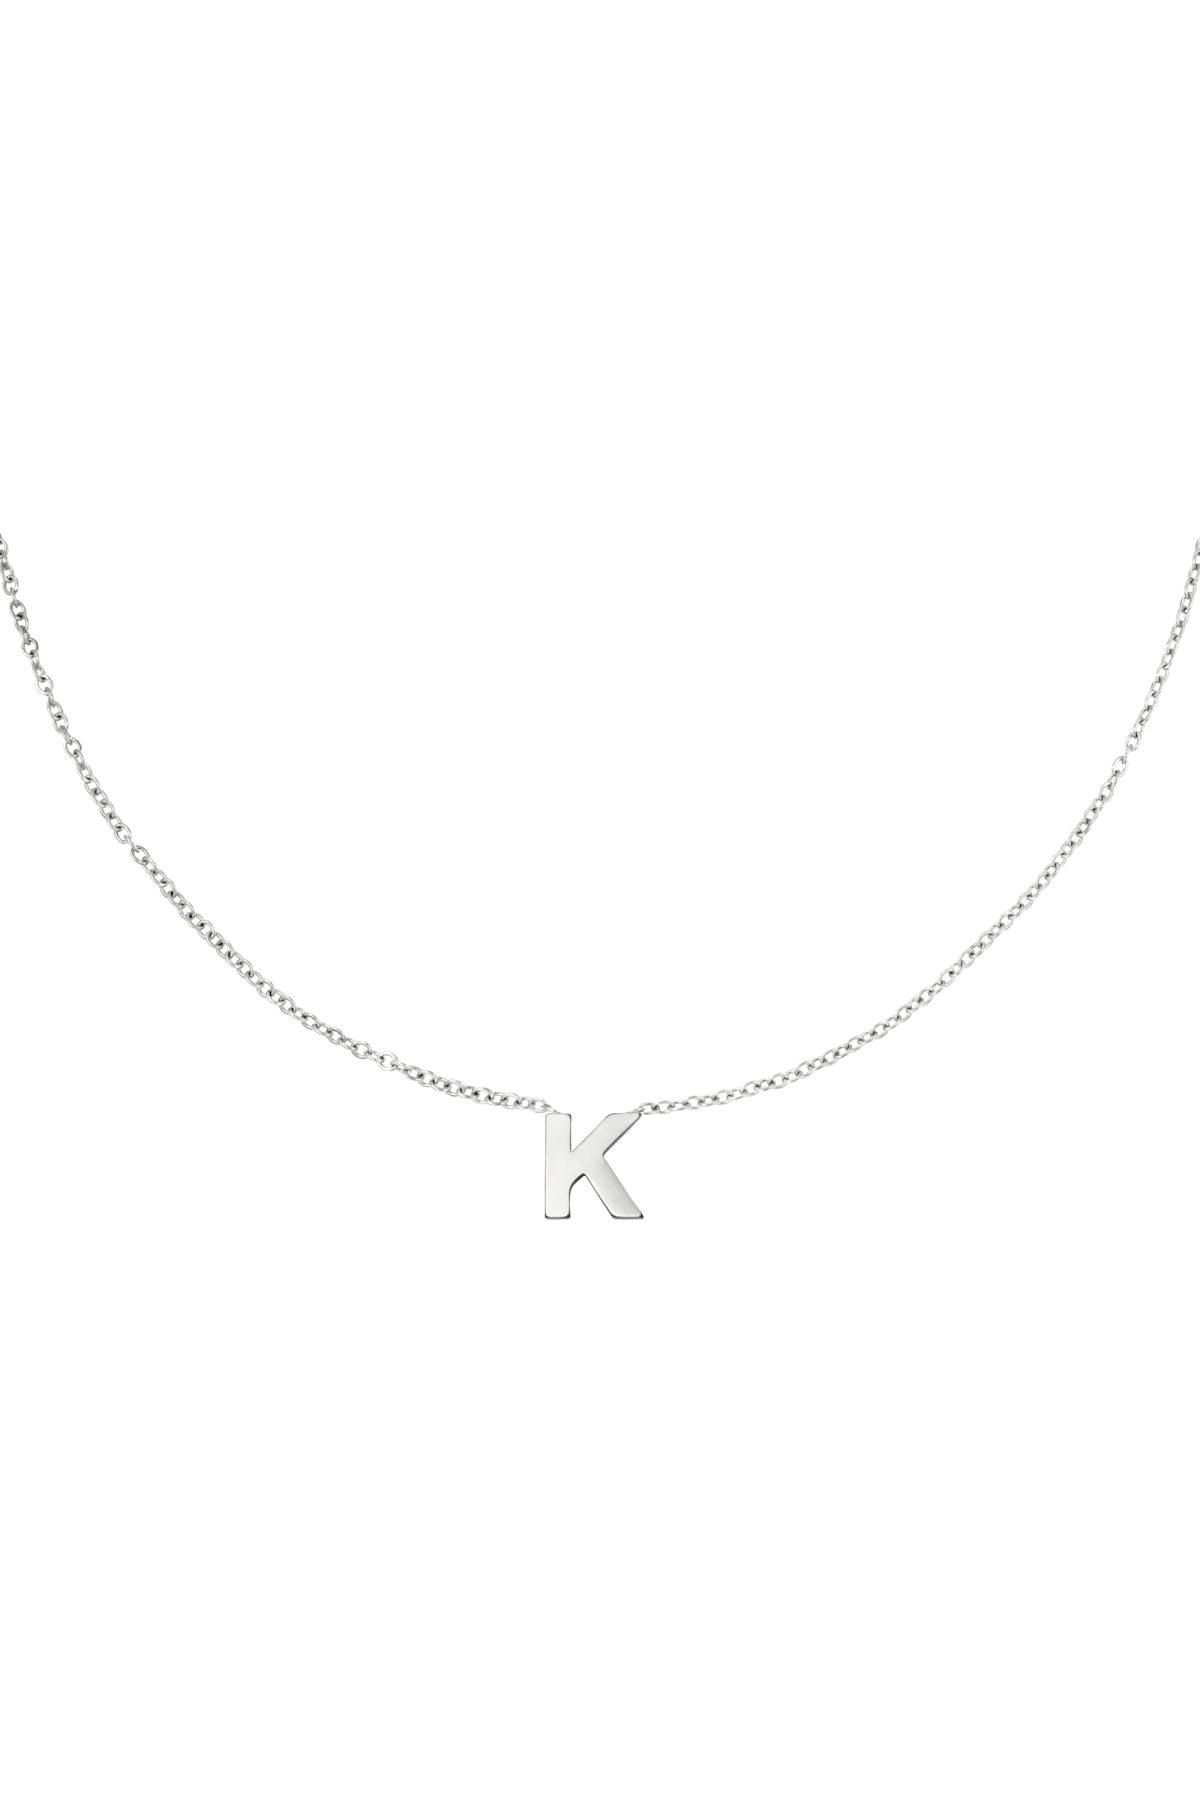 Silver / Stainless steel necklace initial K Silver Picture11